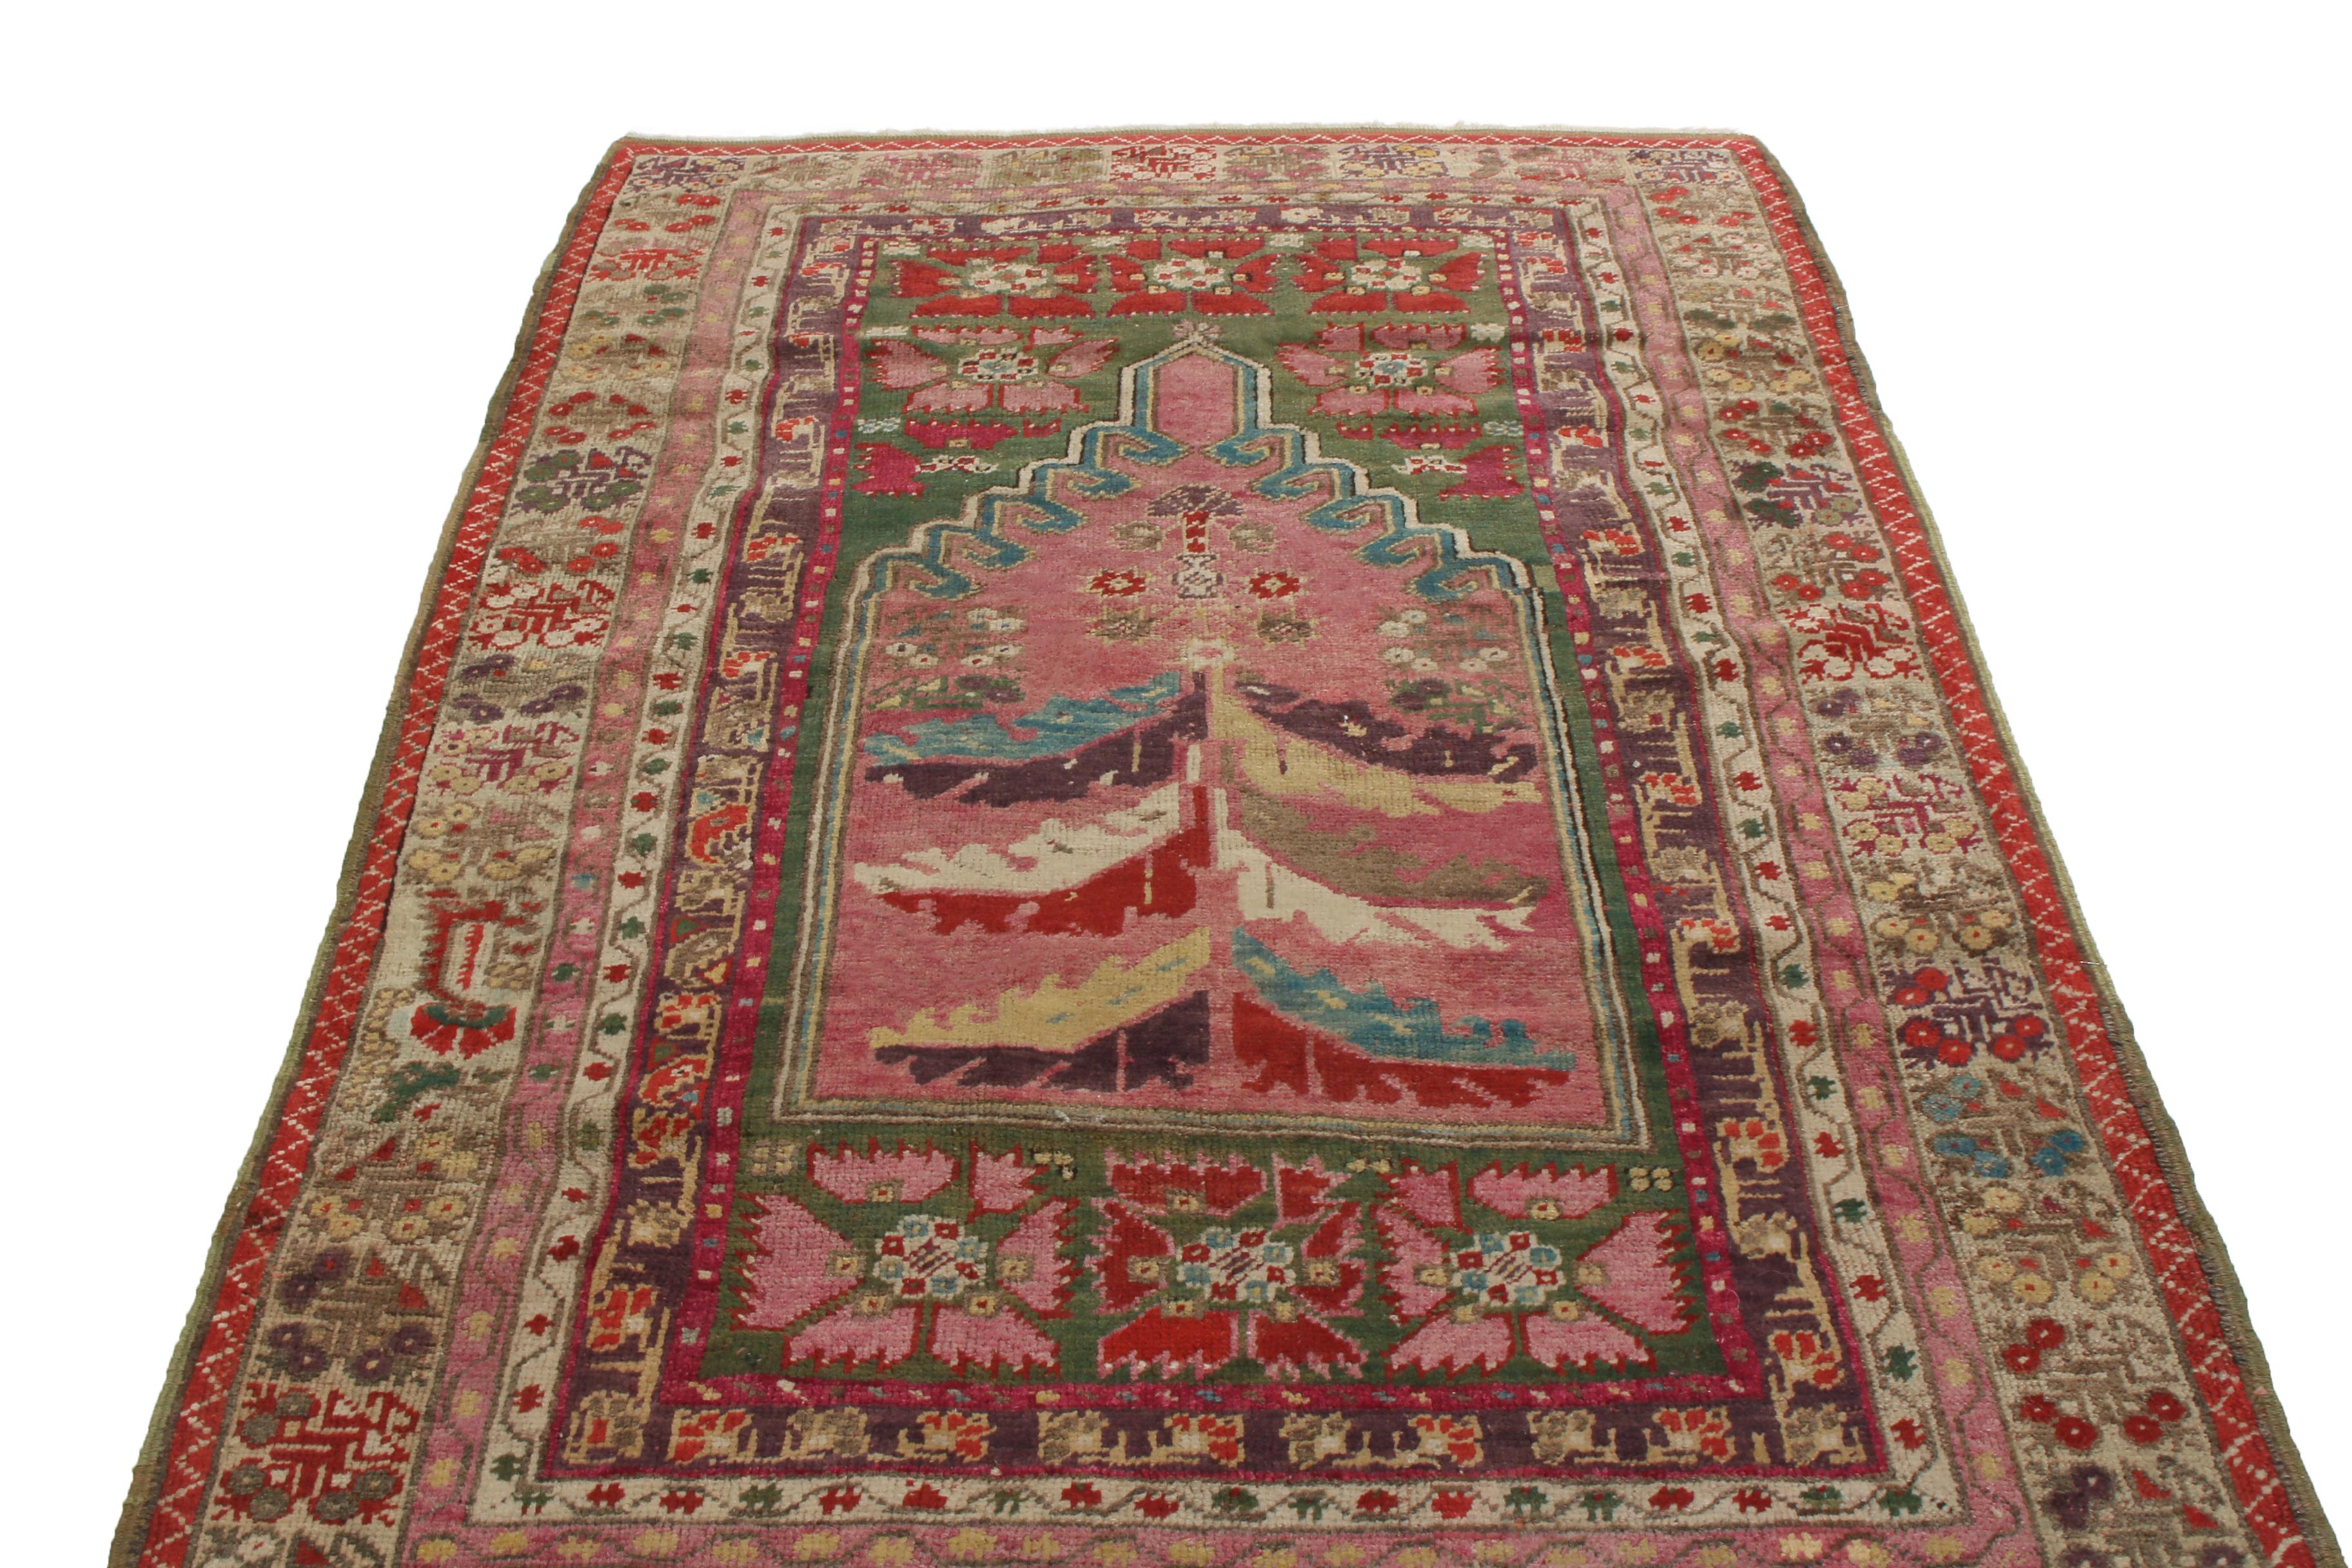 Originating from Turkey in 1880, this antique transitional Anatolian wool rug features an uncommon floral field design and a wide variety of colorways. hand knotted in high-quality wool, the red, golden-beige, blue, white, and purple fanning leaves